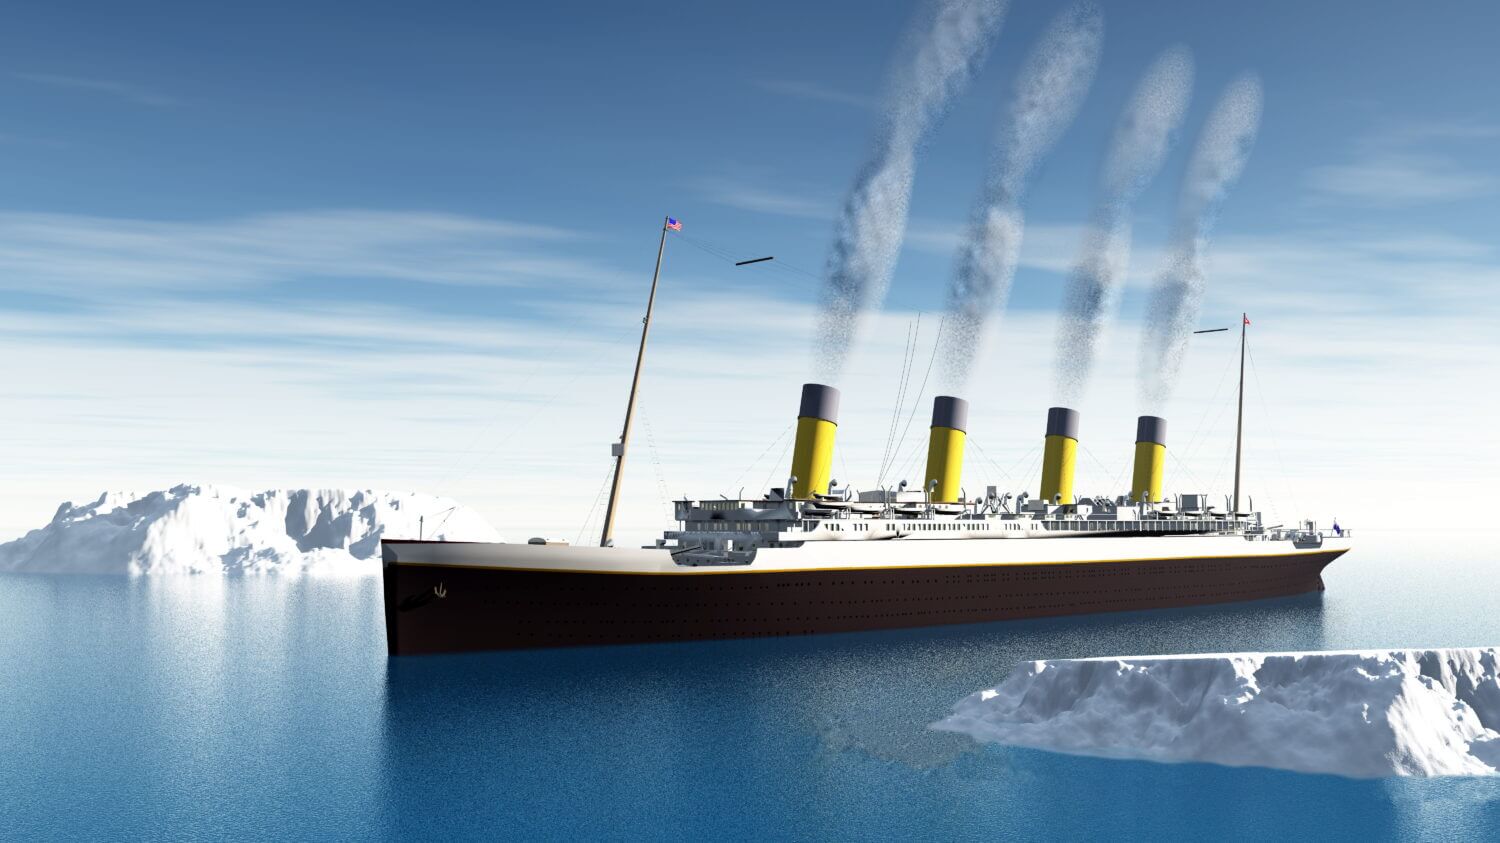 Famous Titanic ship floating among icebergs on the water by cloudy day - 3D render